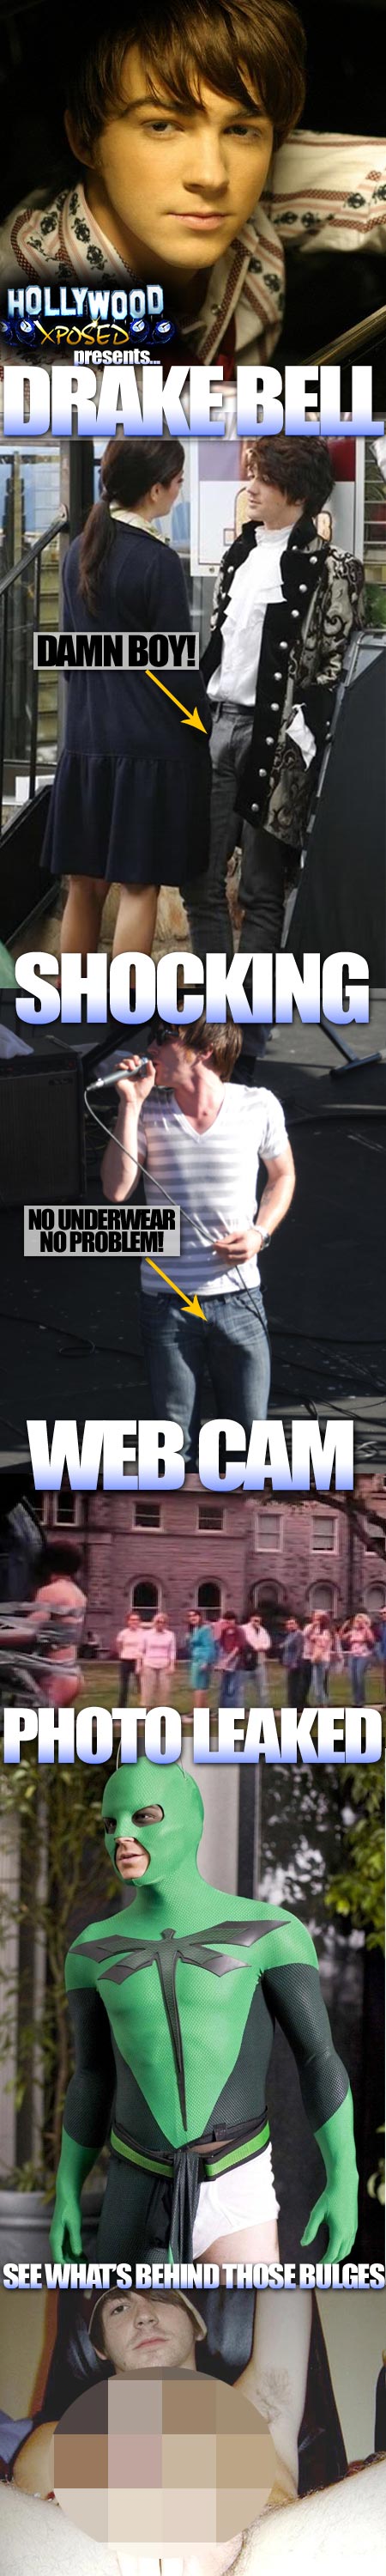 Hollywood-Xposed: Drake Bell